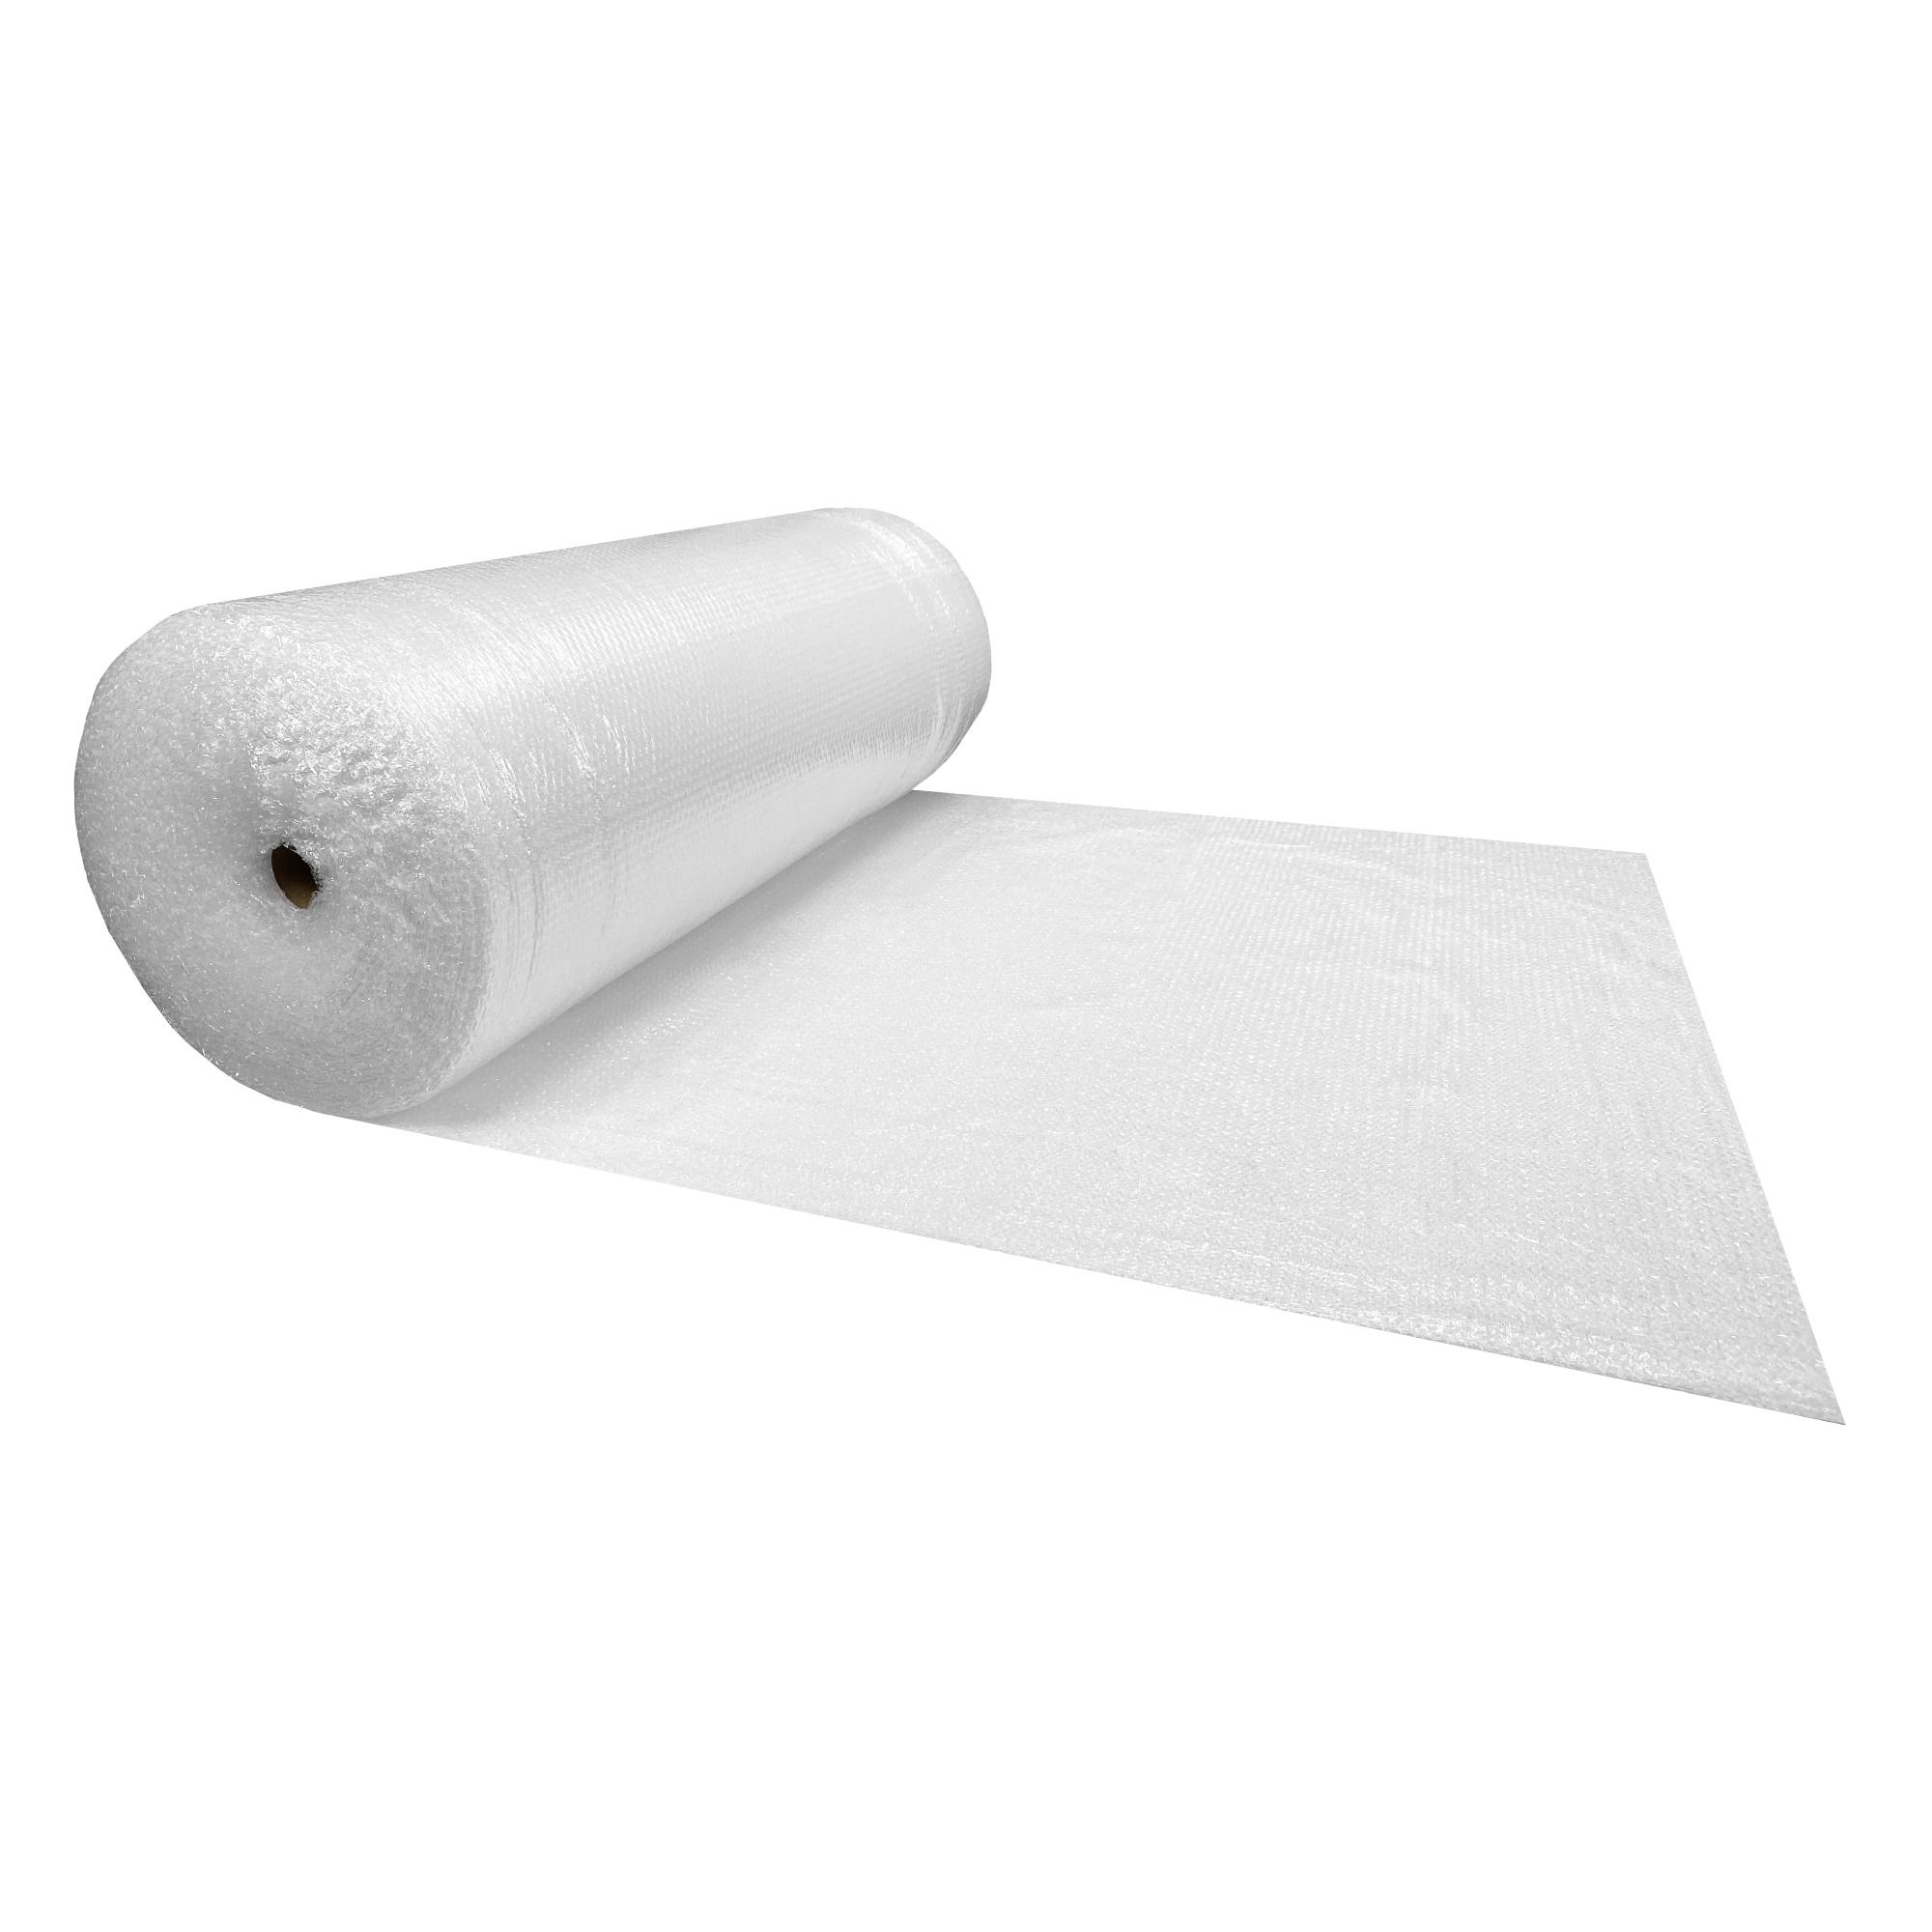 Small Bubble Wrap Roll 1200mm x 100m 120cm/4ft/48" x 100m Moving Greenhouse 